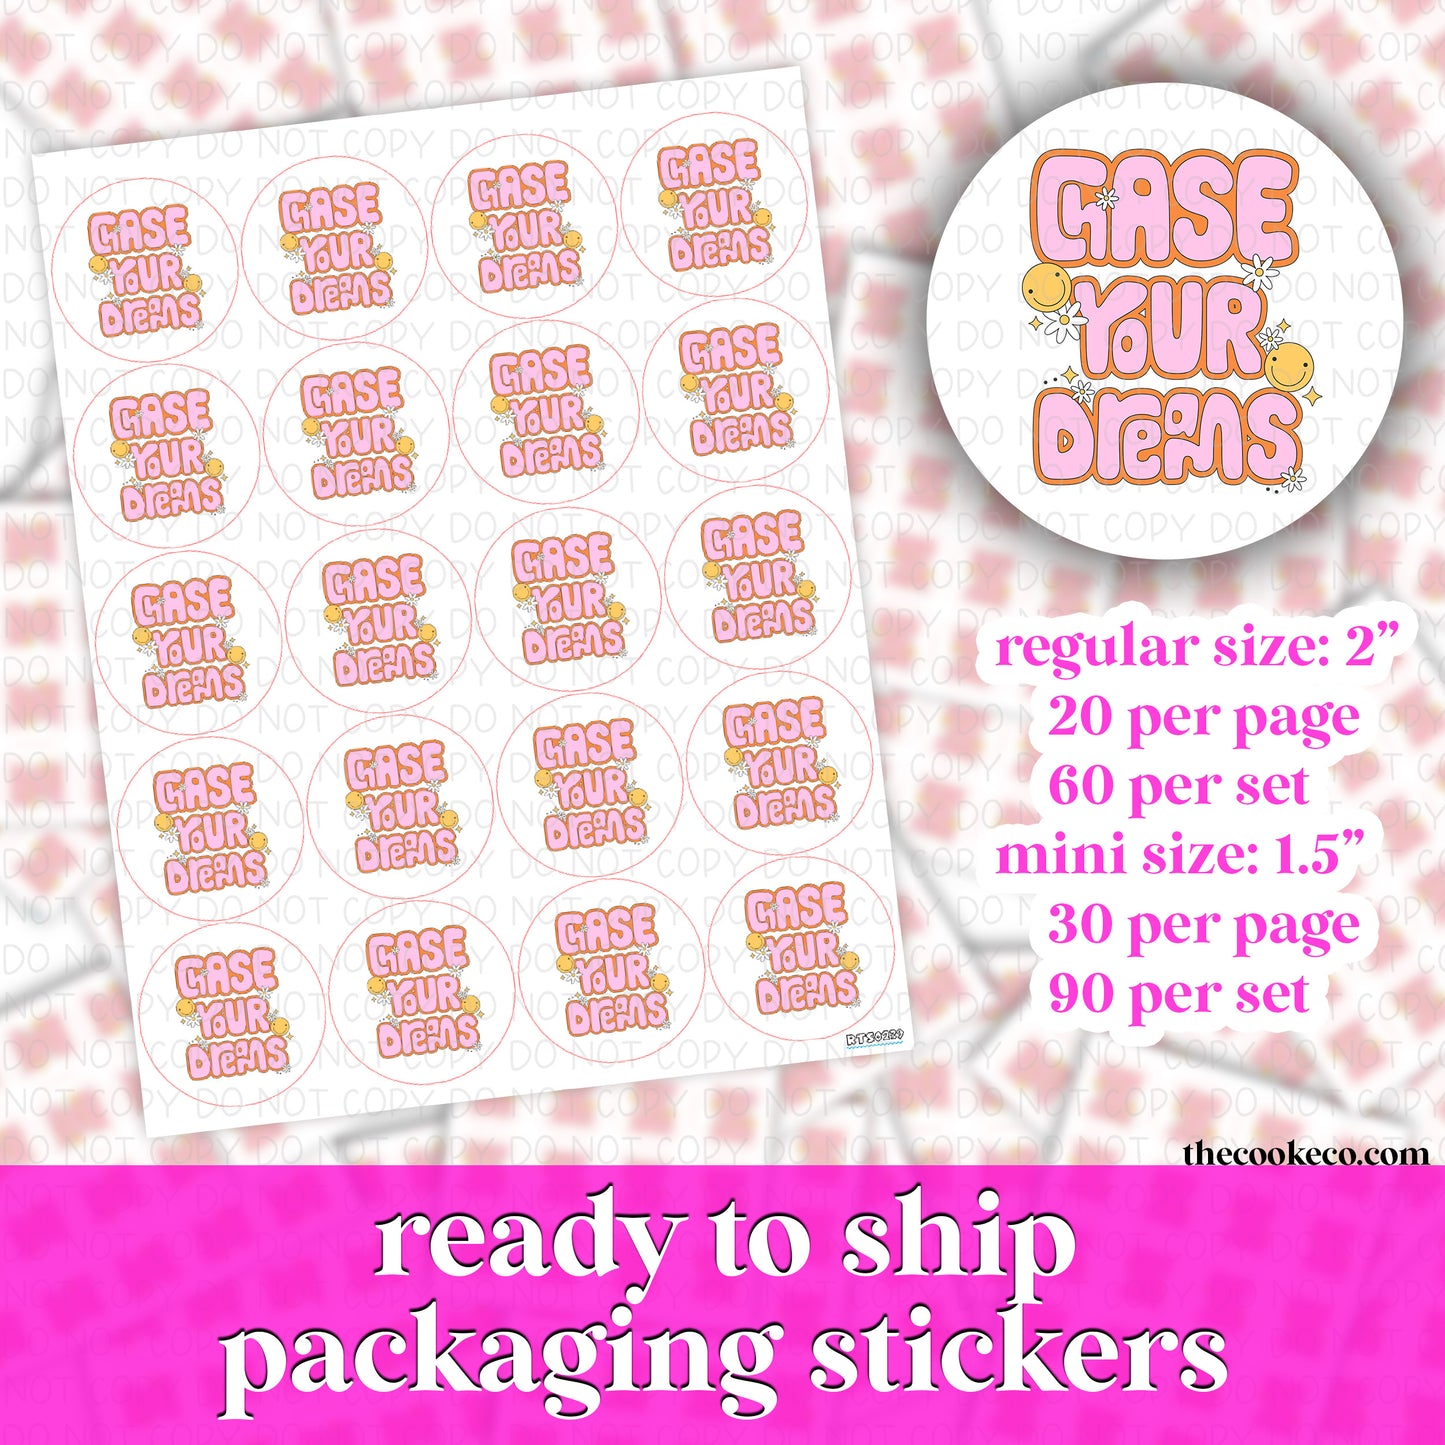 PACKAGING STICKERS | #RTS0239 - CHASE YOUR DREAMS